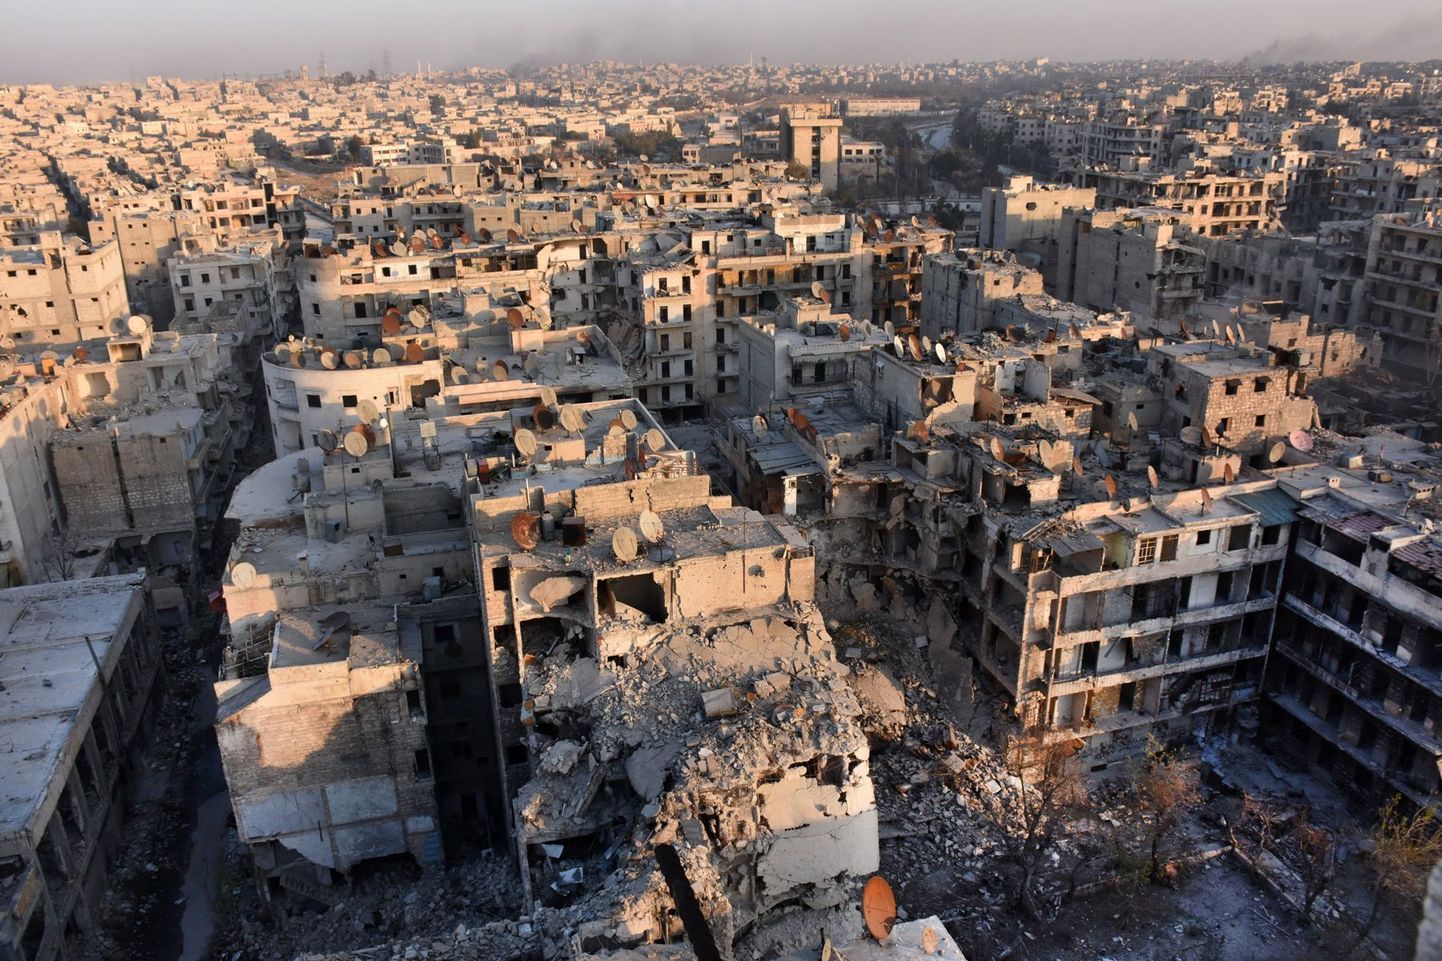 A general view of Aleppo taken from the top of a building in the city's Bustan al-Basha neighbourhood on November 28, 2016, during Syrian government forces assault to retake the entire northern city from rebel fighters.
In a major breakthrough in the push to retake the whole city, regime forces captured six rebel-held districts of eastern Aleppo over the weekend, including Masaken Hanano, the biggest of those in eastern Aleppo.  
 / AFP PHOTO / GEORGE OURFALIAN